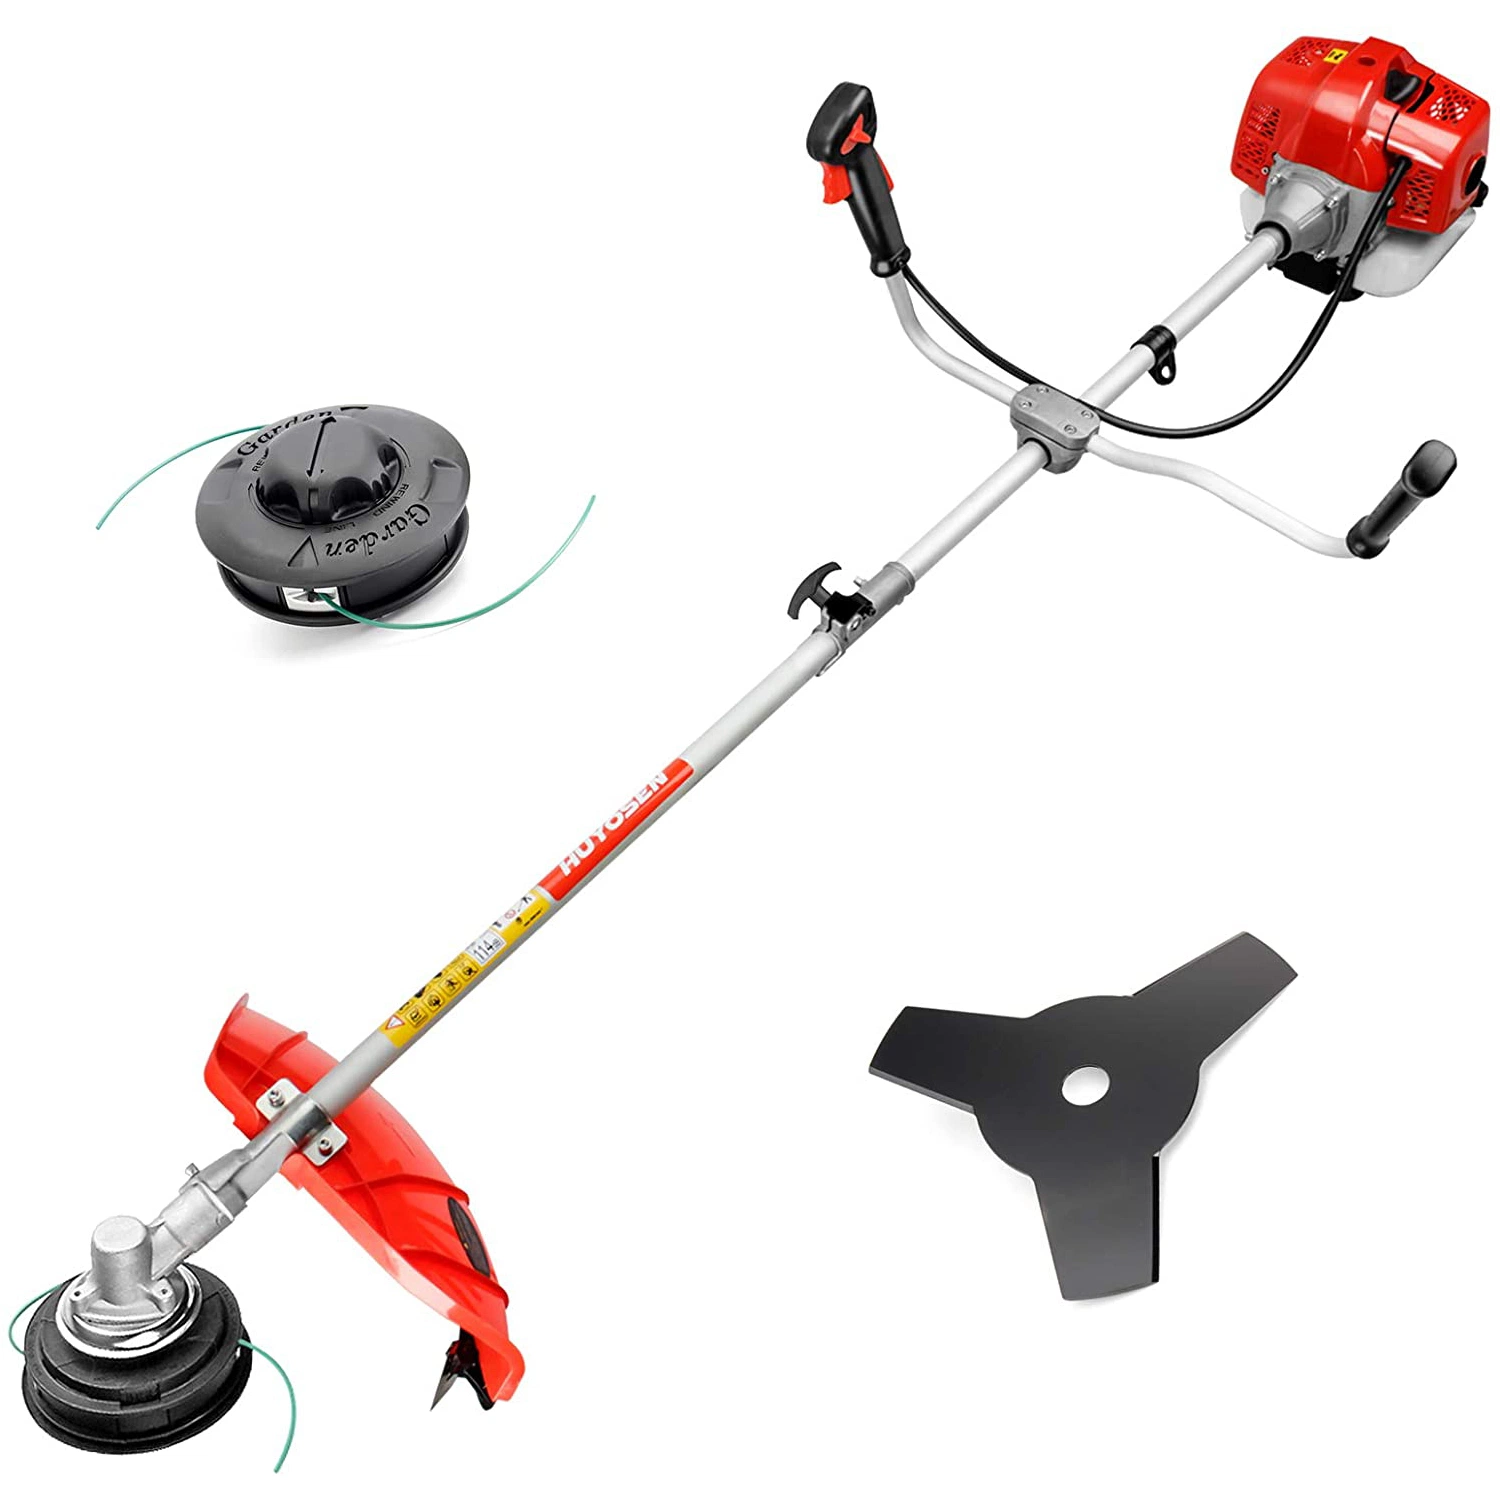 43cc 52cc Gasoline Cutter Weed Eater Brush Cutter Backpack Grass Trimmer